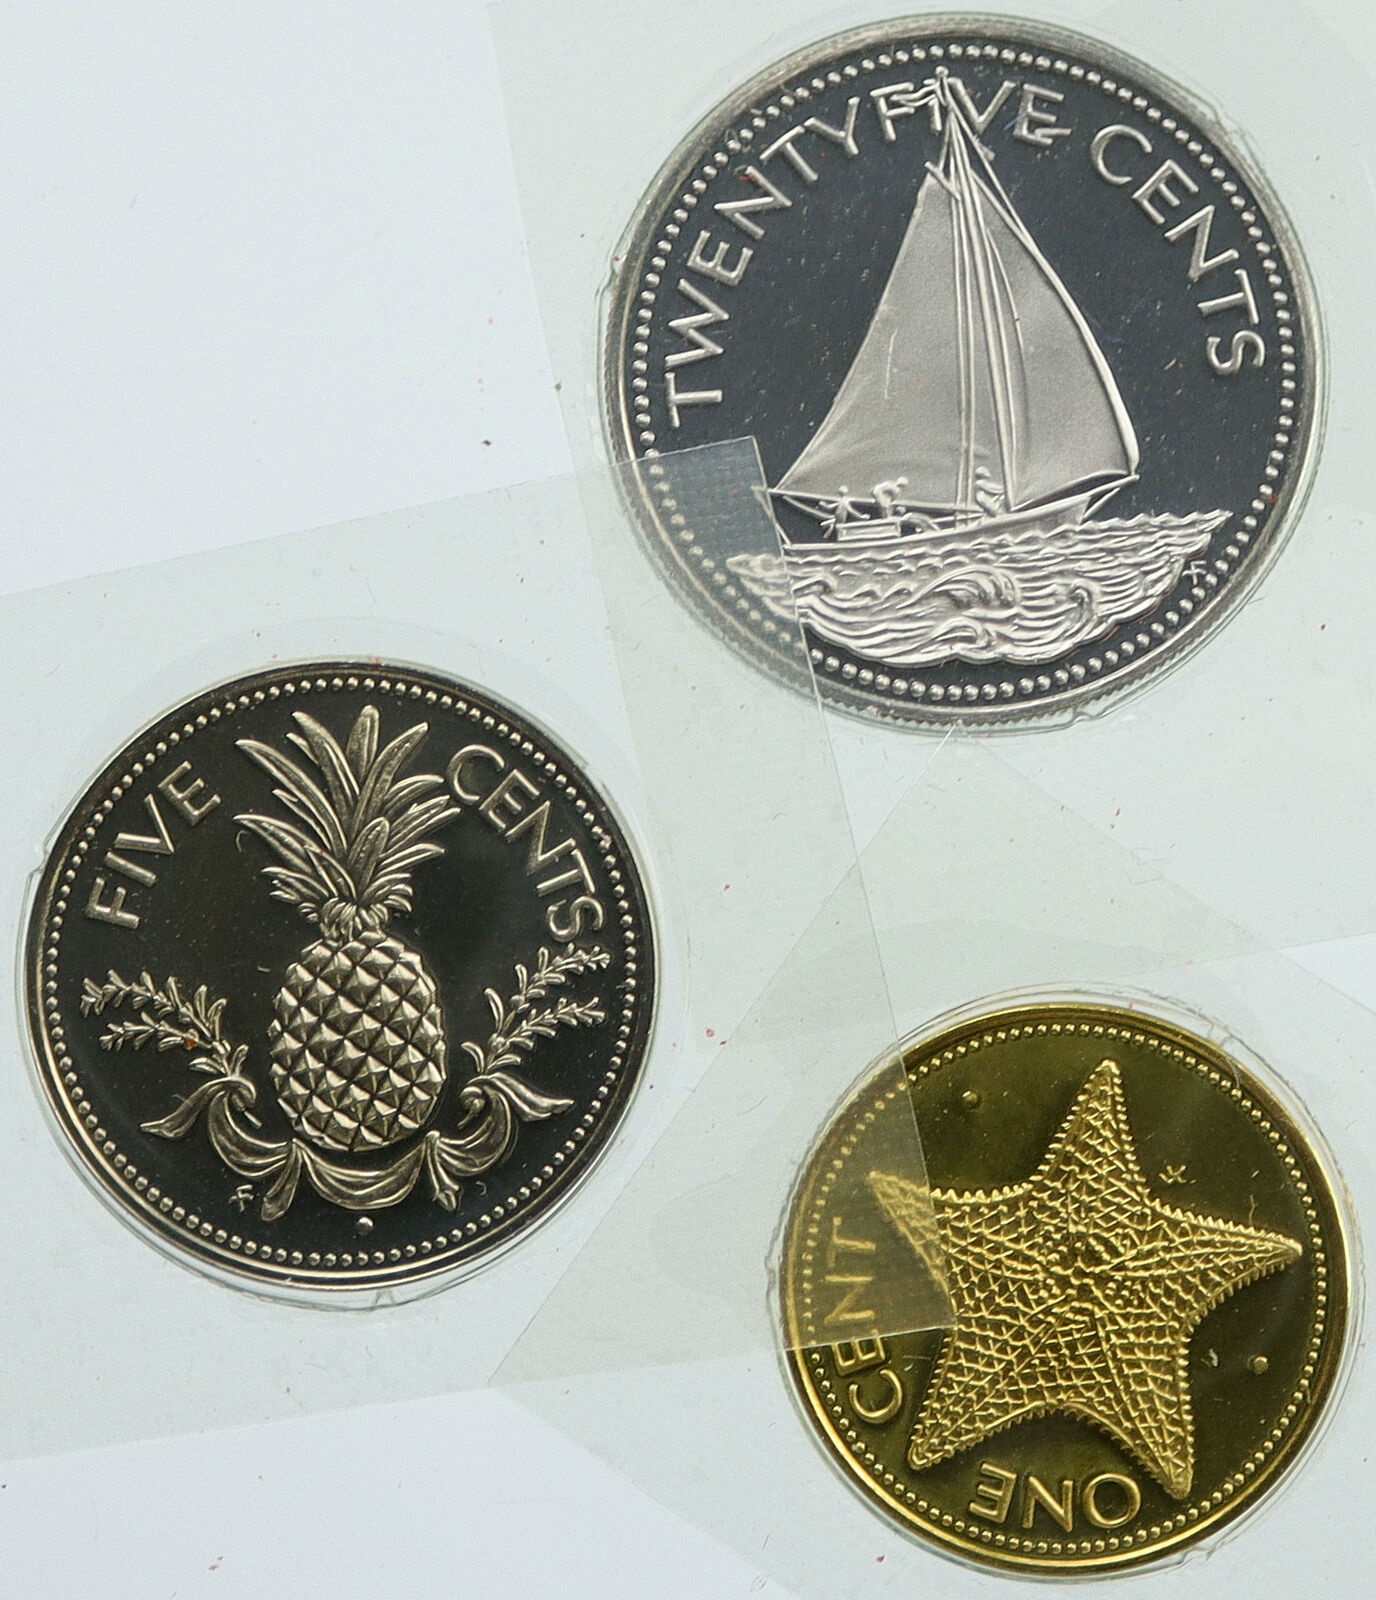 1975 JAMAICA Lot of 3 Proof WORLD COINS Authentic OLD Group DEAL GIFT i115934